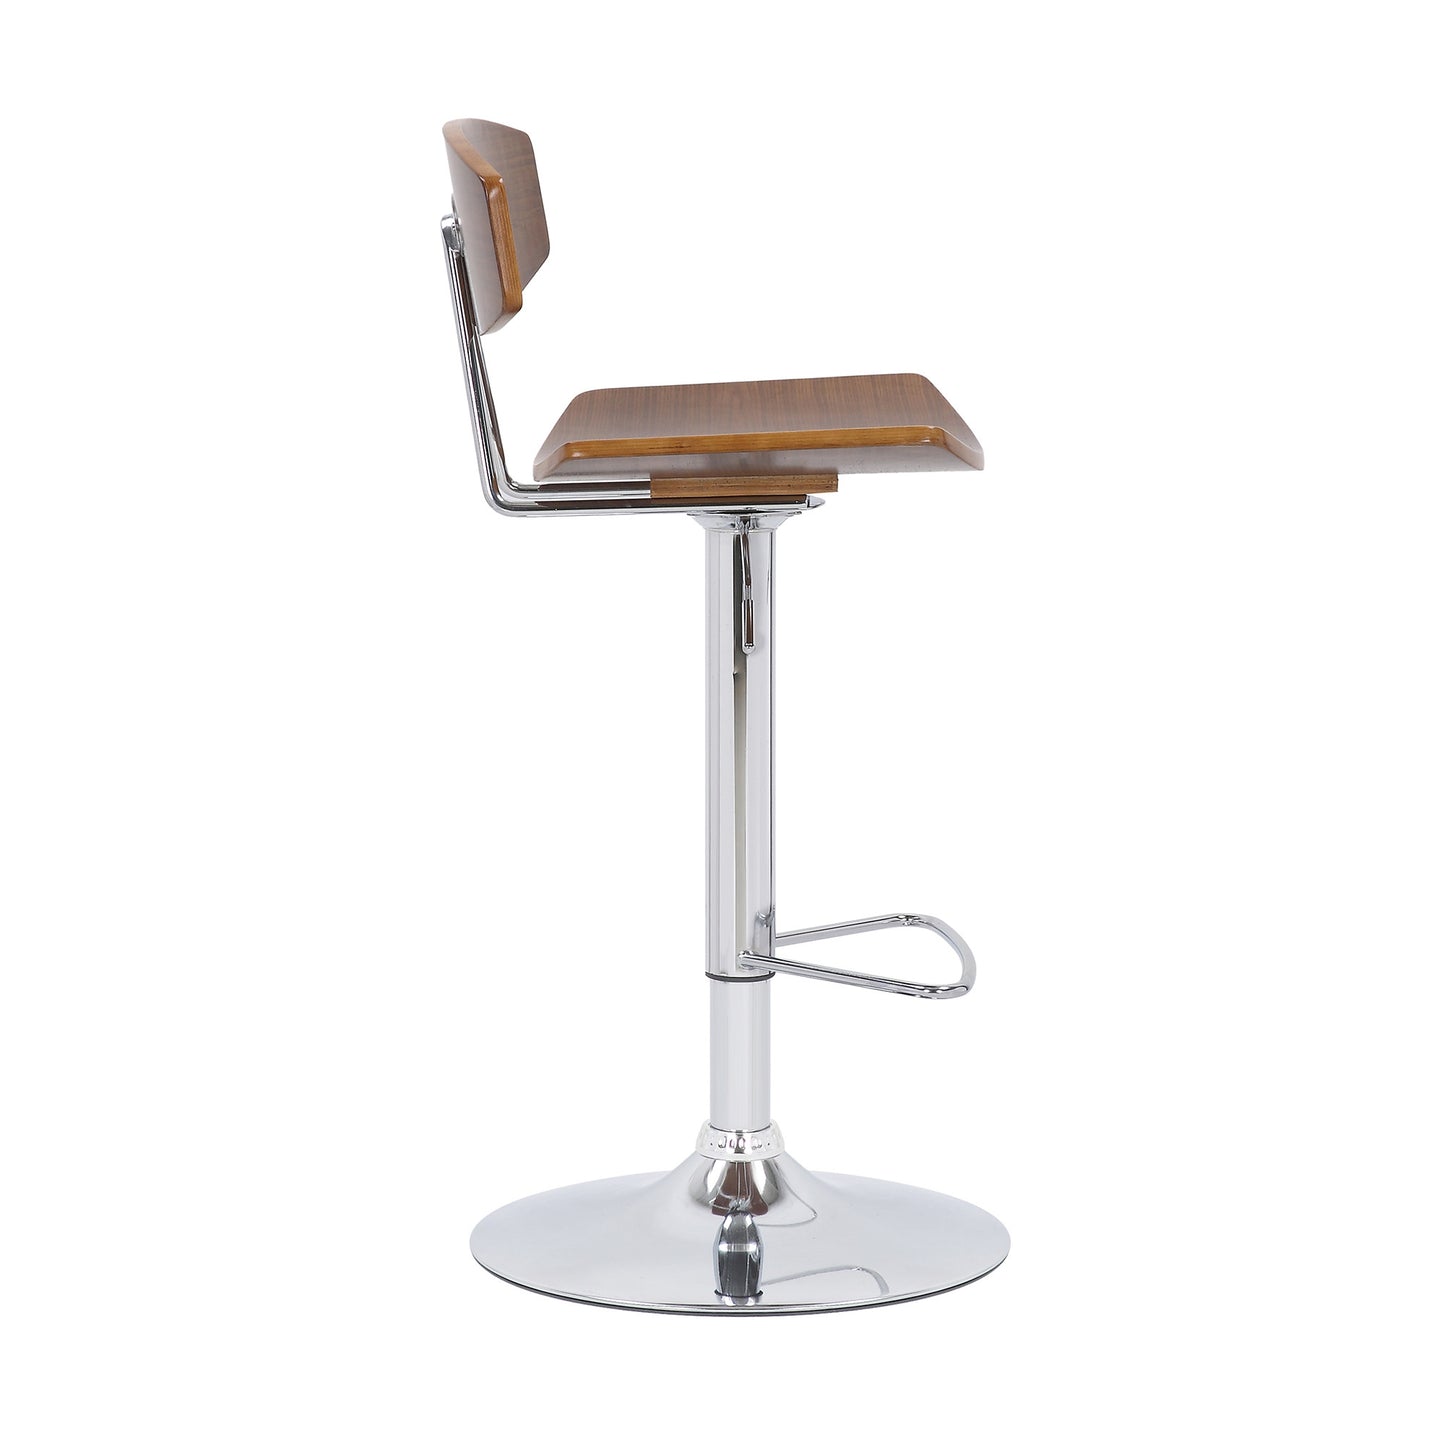 42" Silver and Walnut Adjustable Height Bar Chair